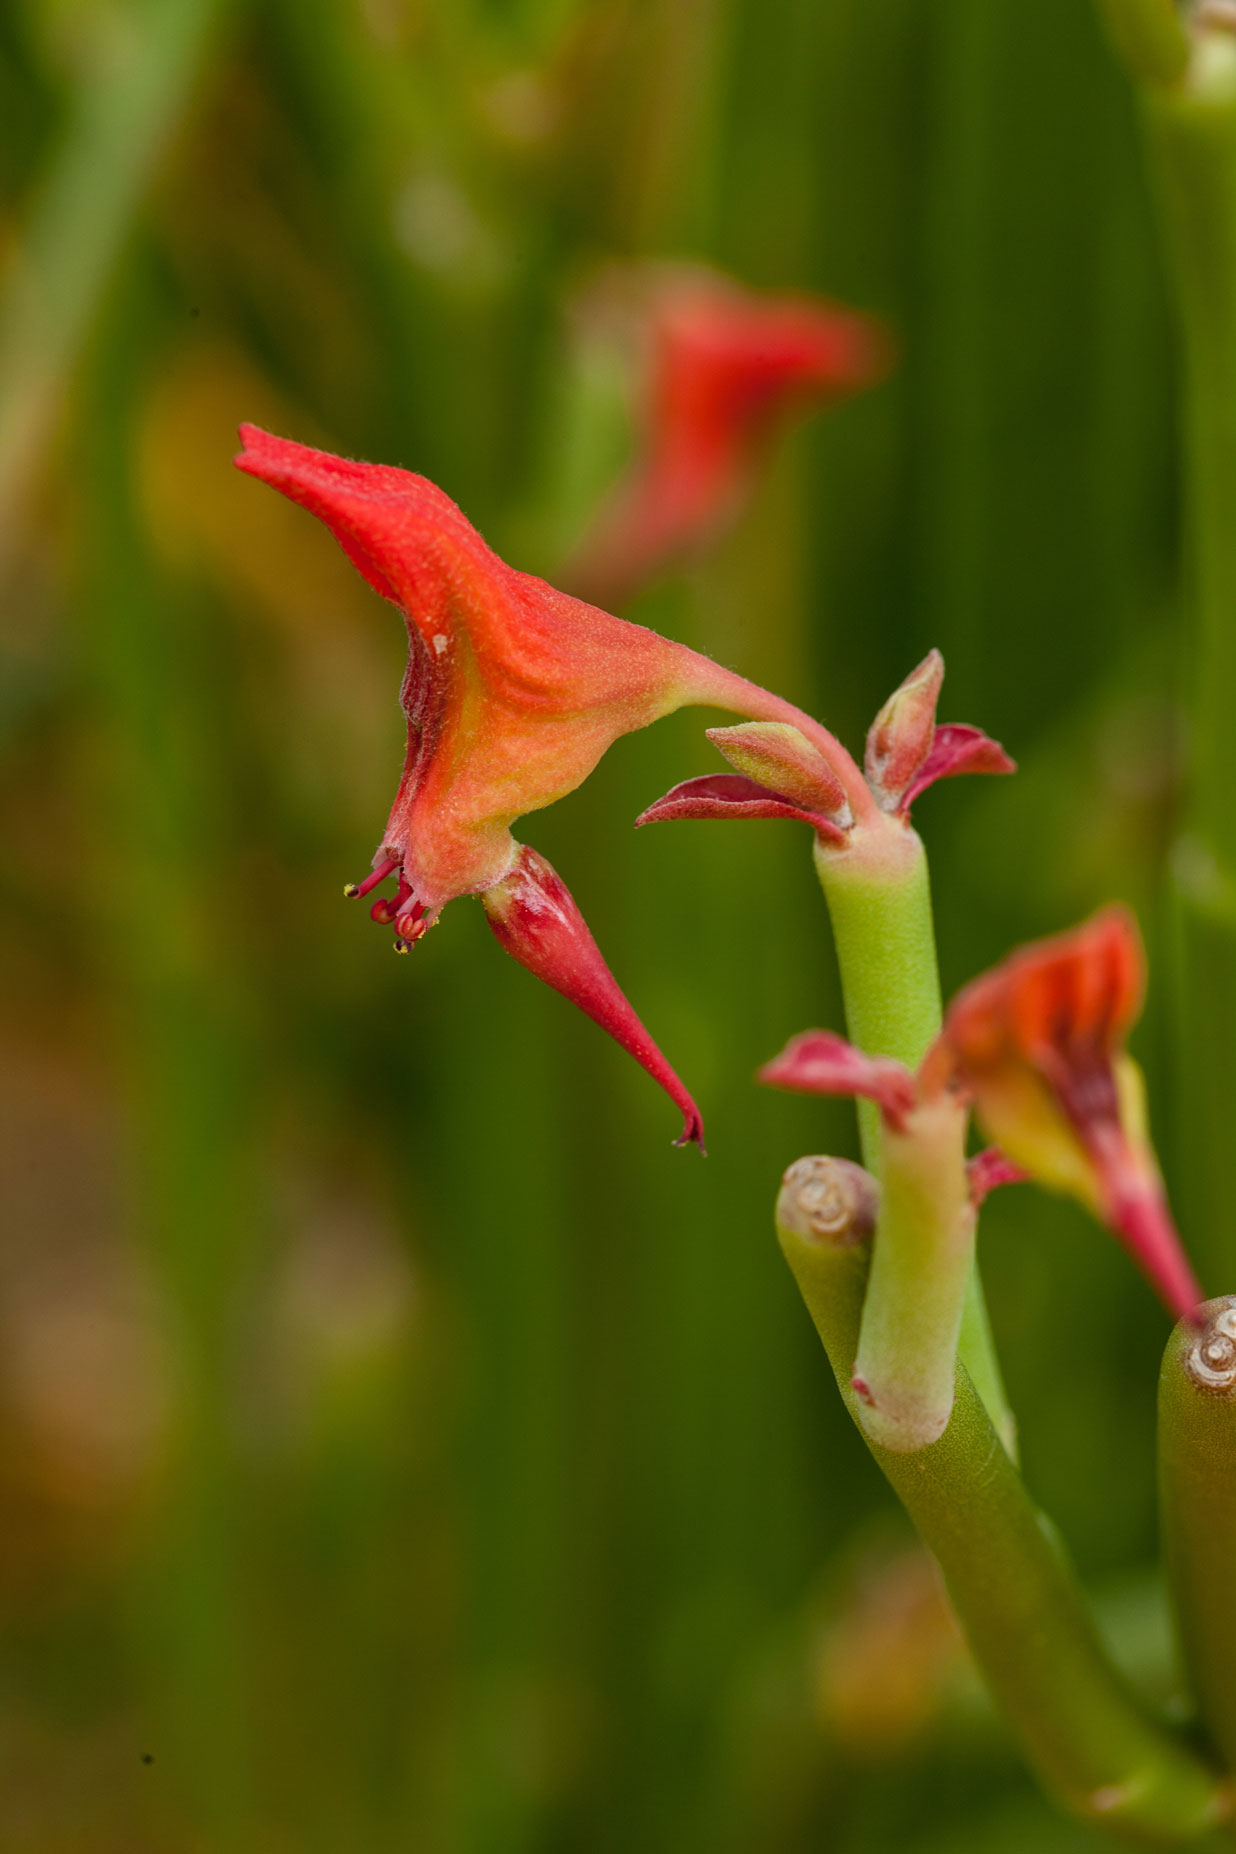 A close-up of the red triangular bloom of a Slipper Flower.